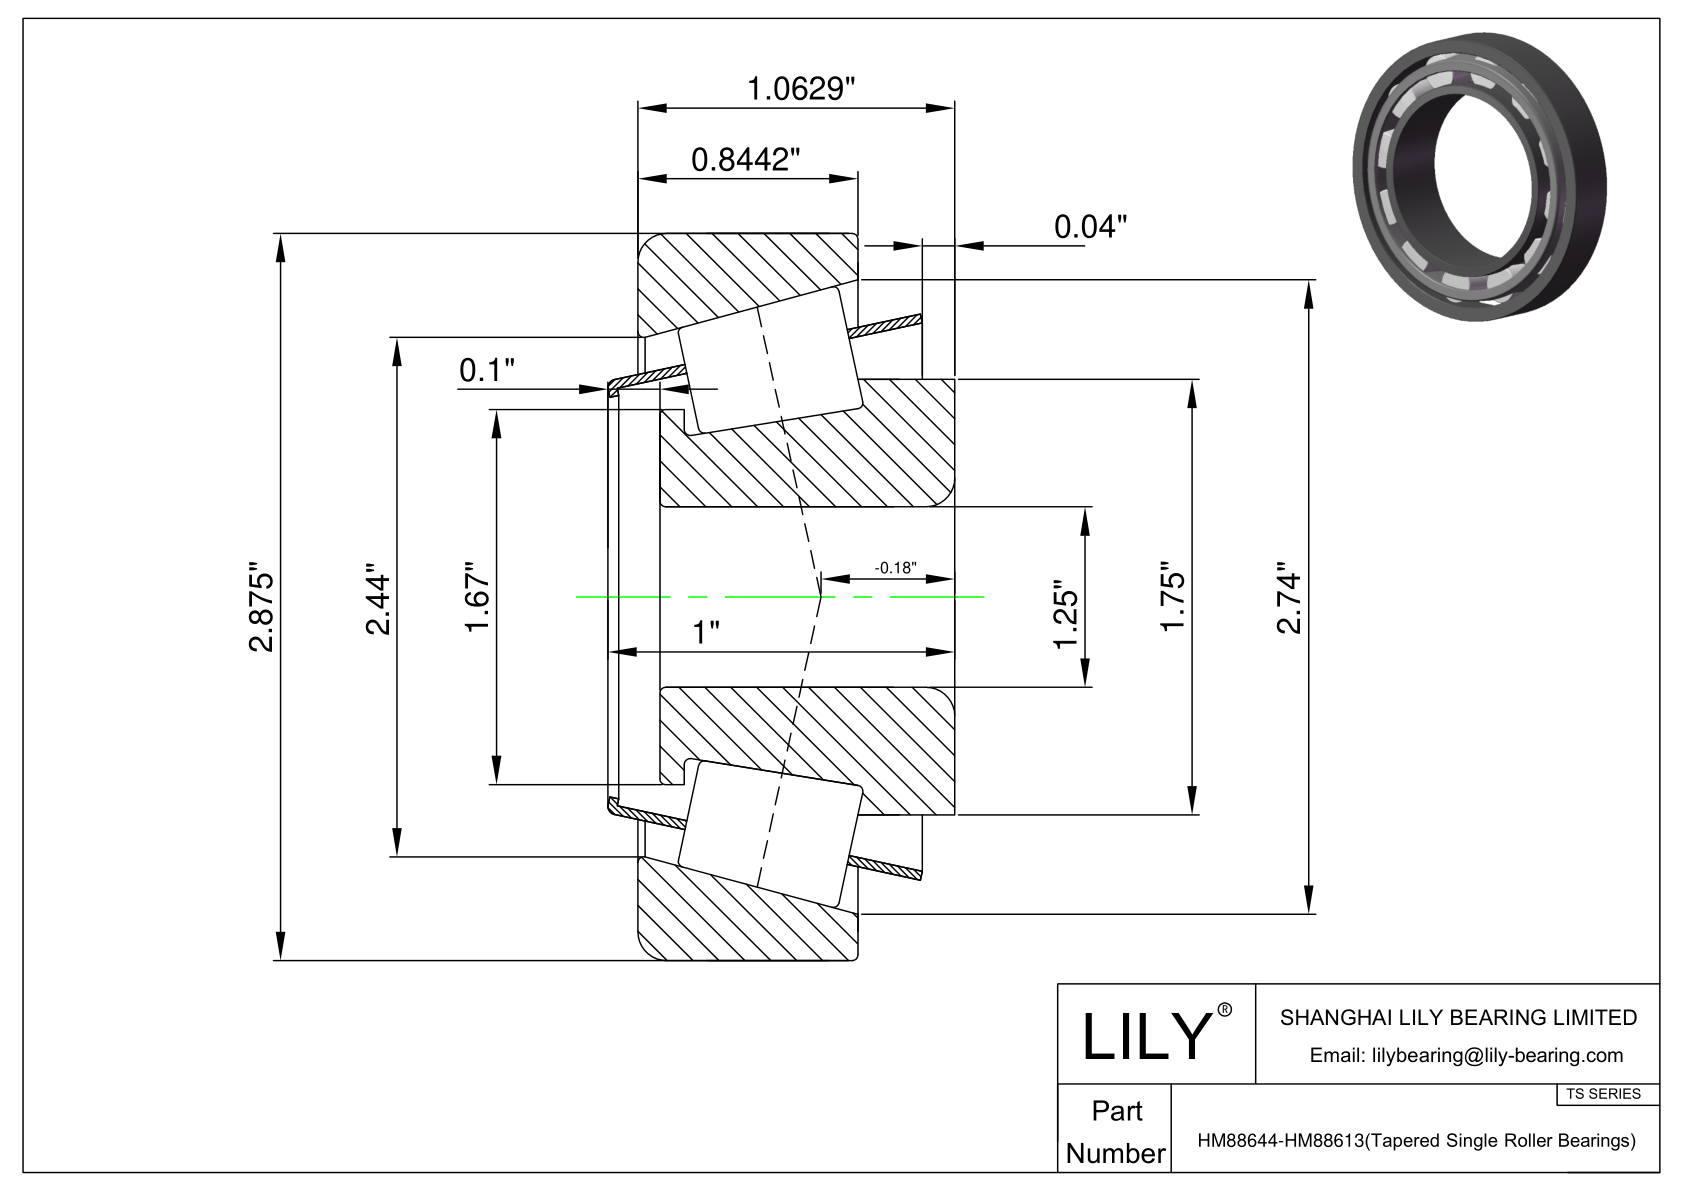 HM88644-HM88613 TS (Tapered Single Roller Bearings) (Imperial) cad drawing